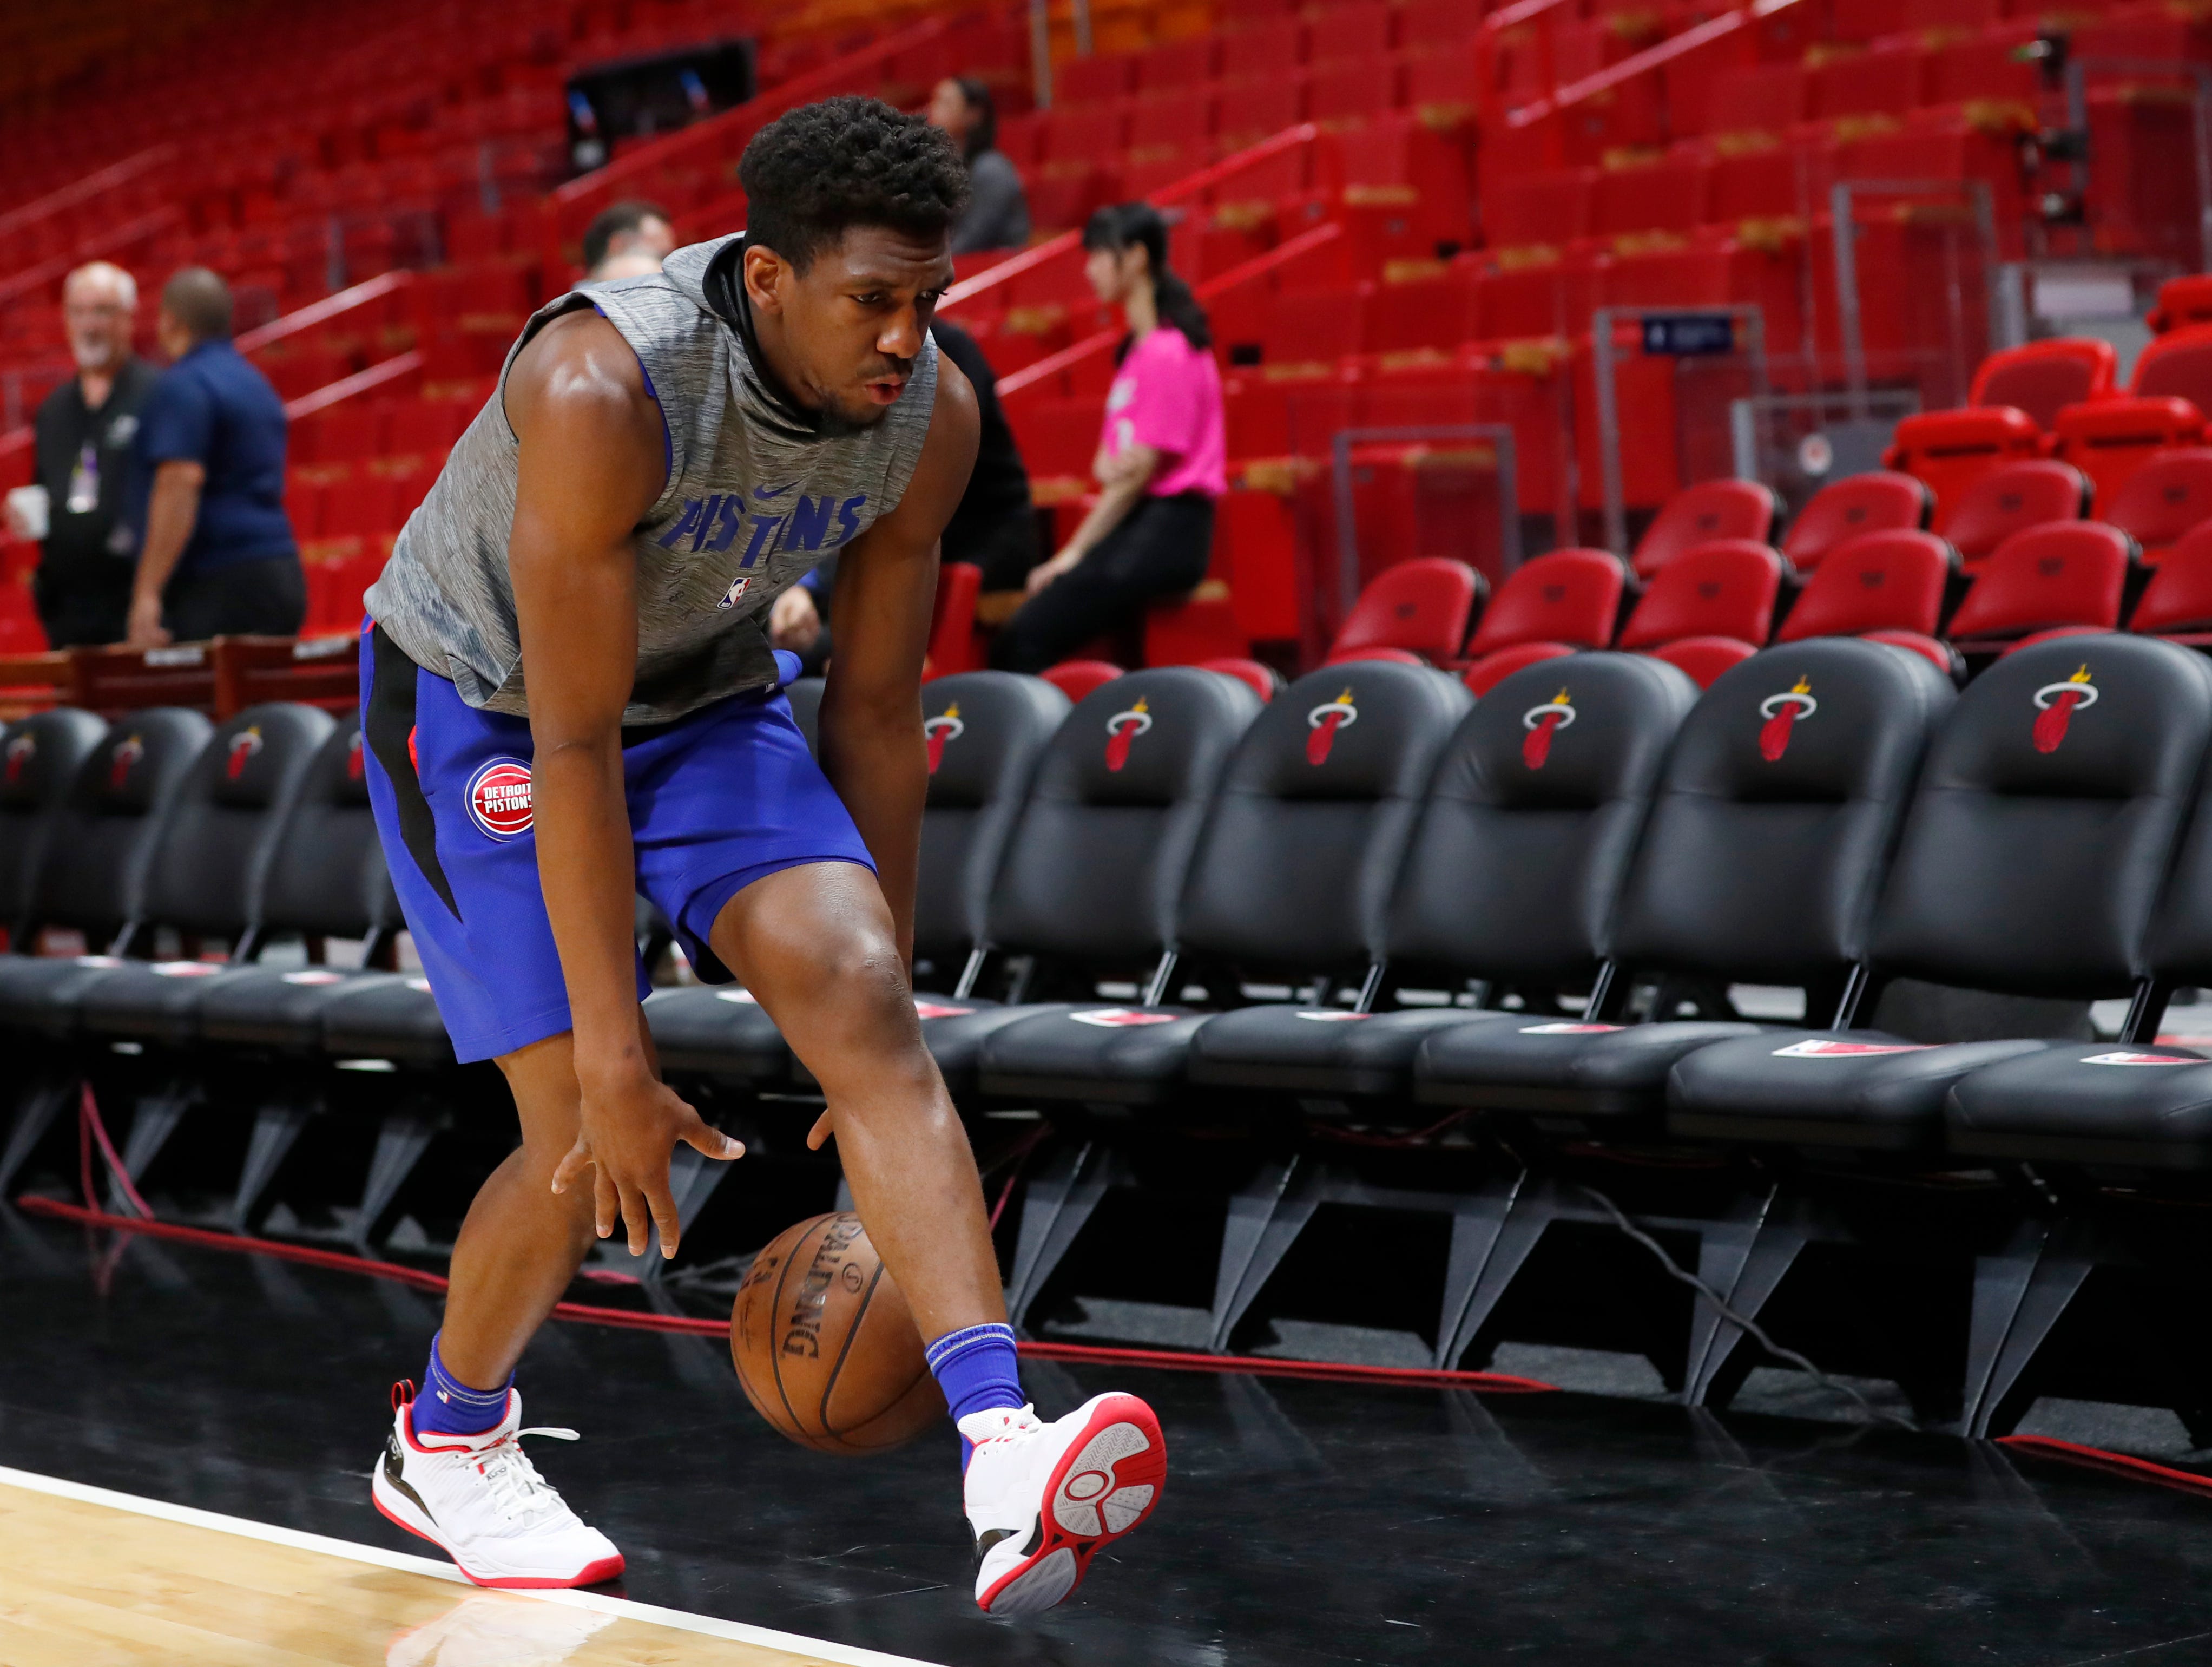 Detroit Pistons guard Langston Galloway warms up before the start of an NBA basketball game against the Miami Heat.